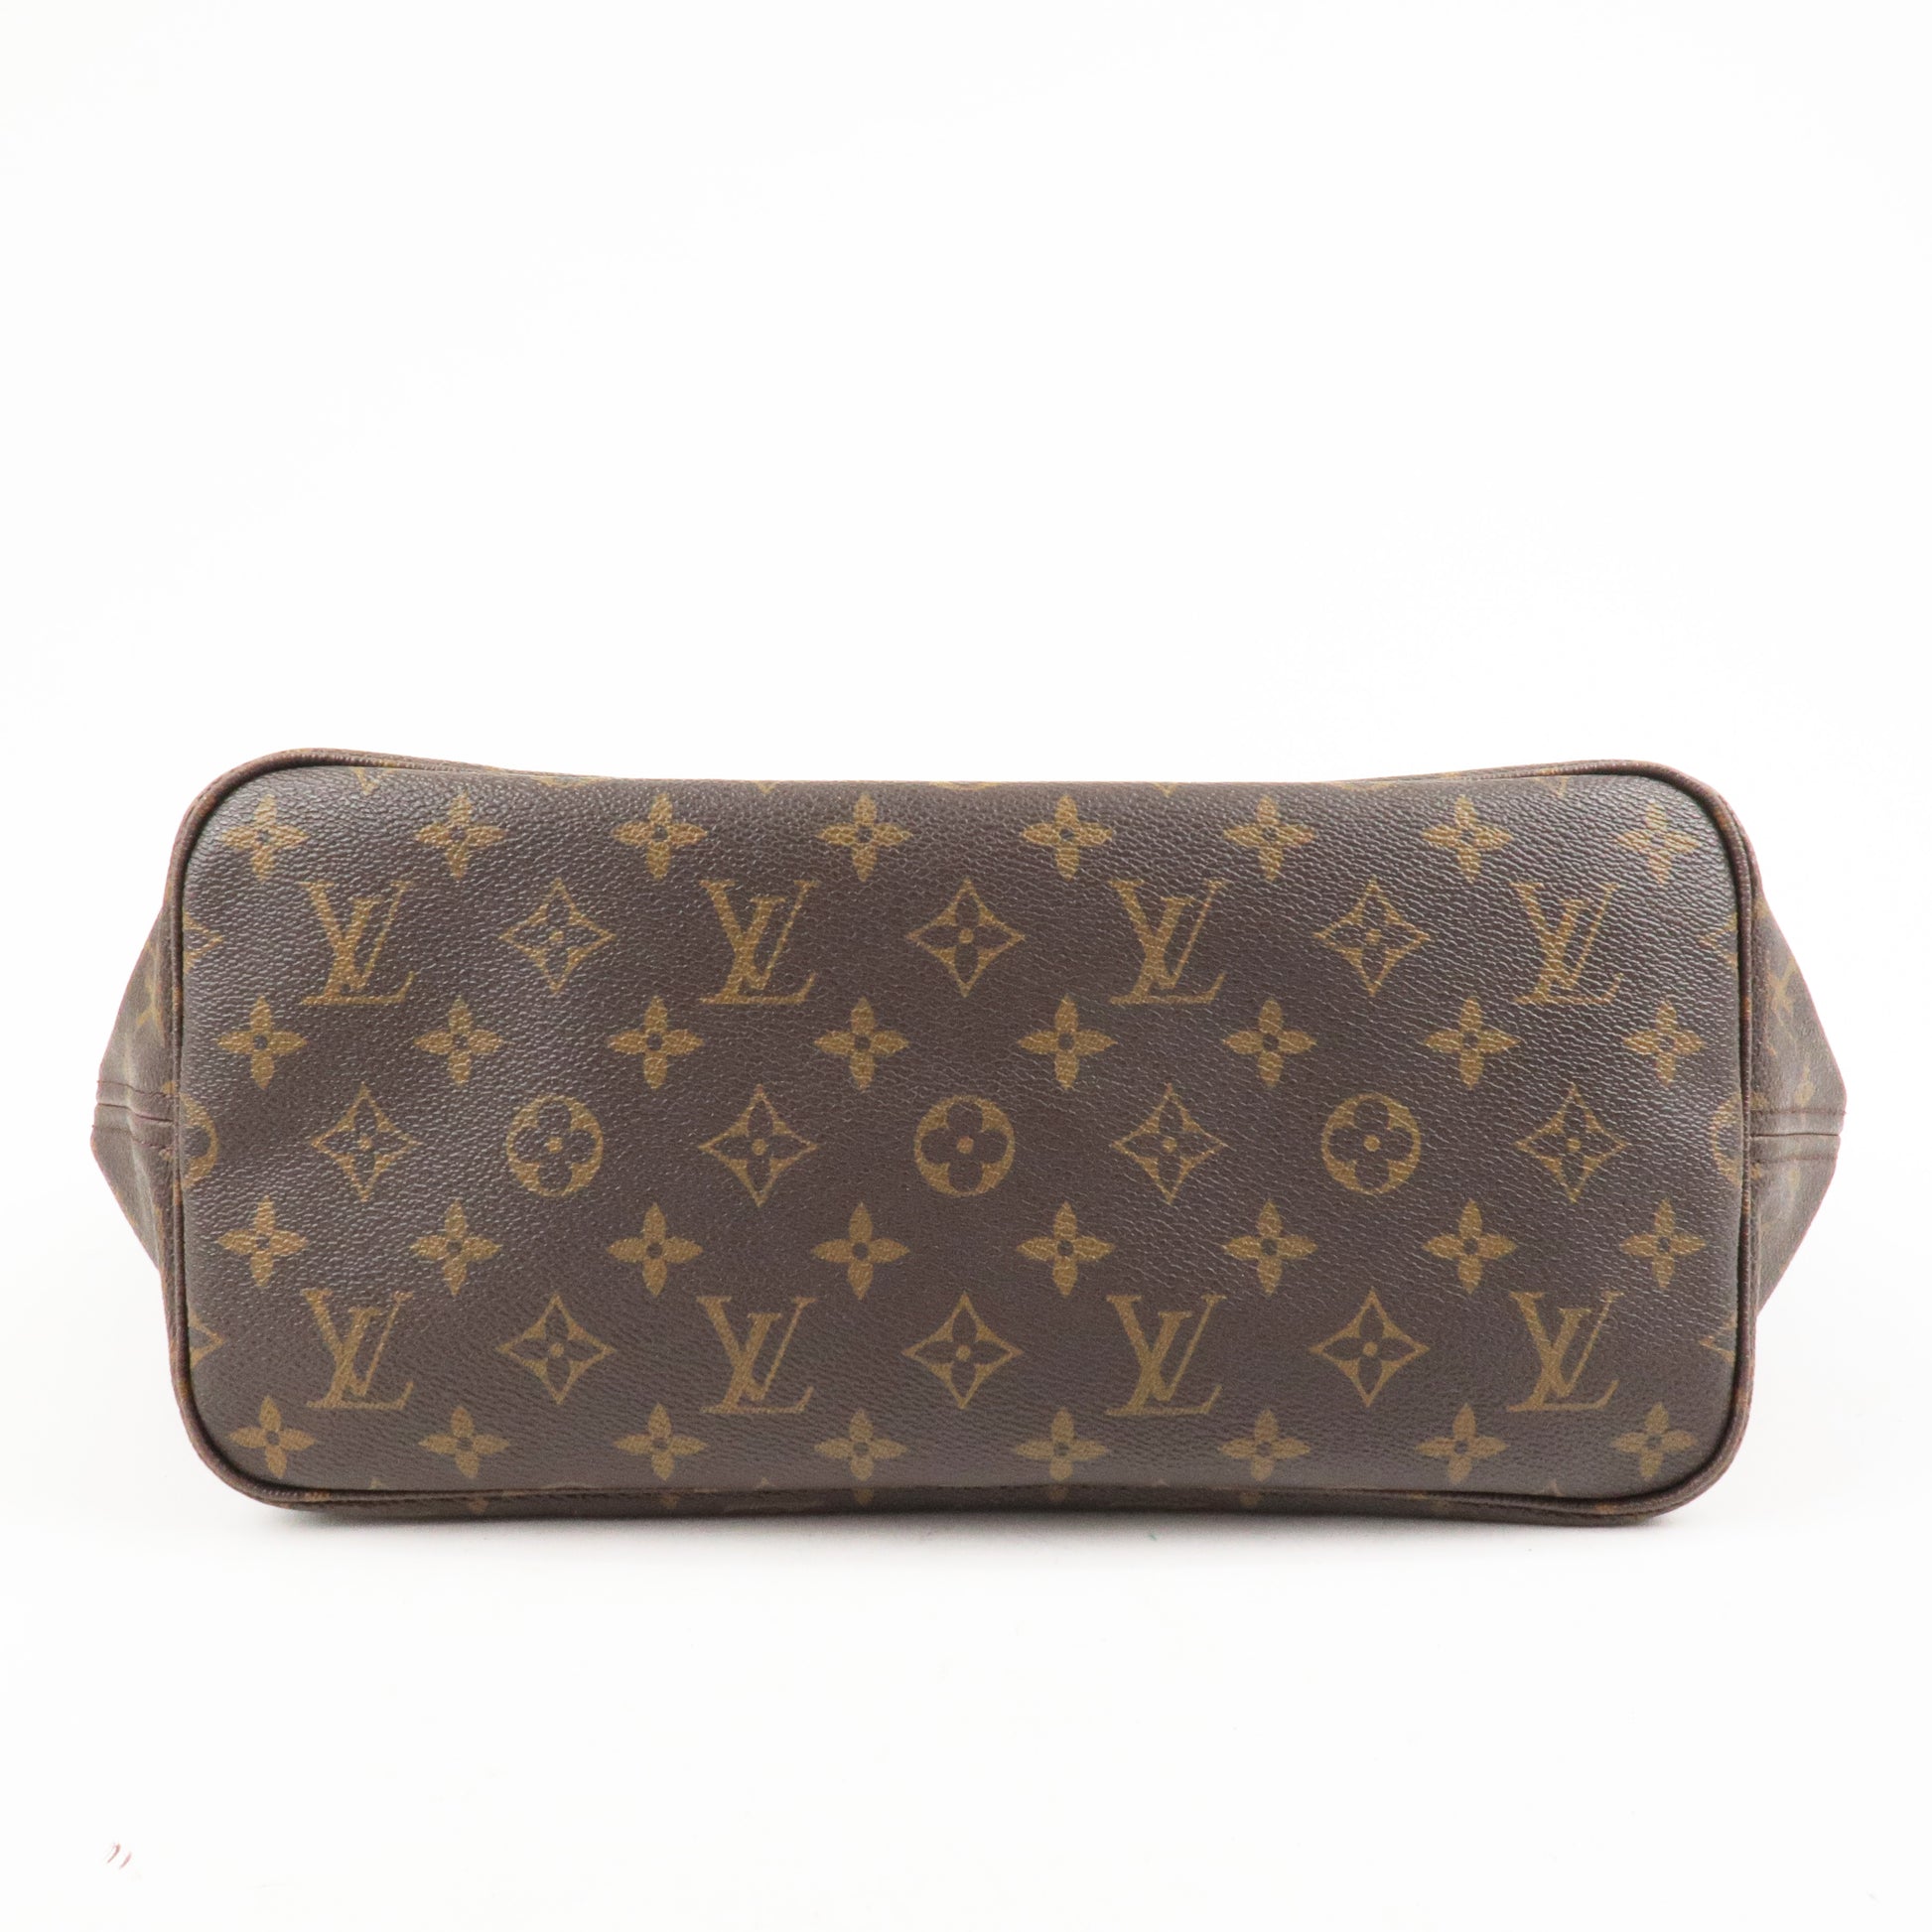 Authenticated Used Louis Vuitton Monogram Neverfull MM M40156 Tote Bag LV  0073 LOUIS VUITTON 